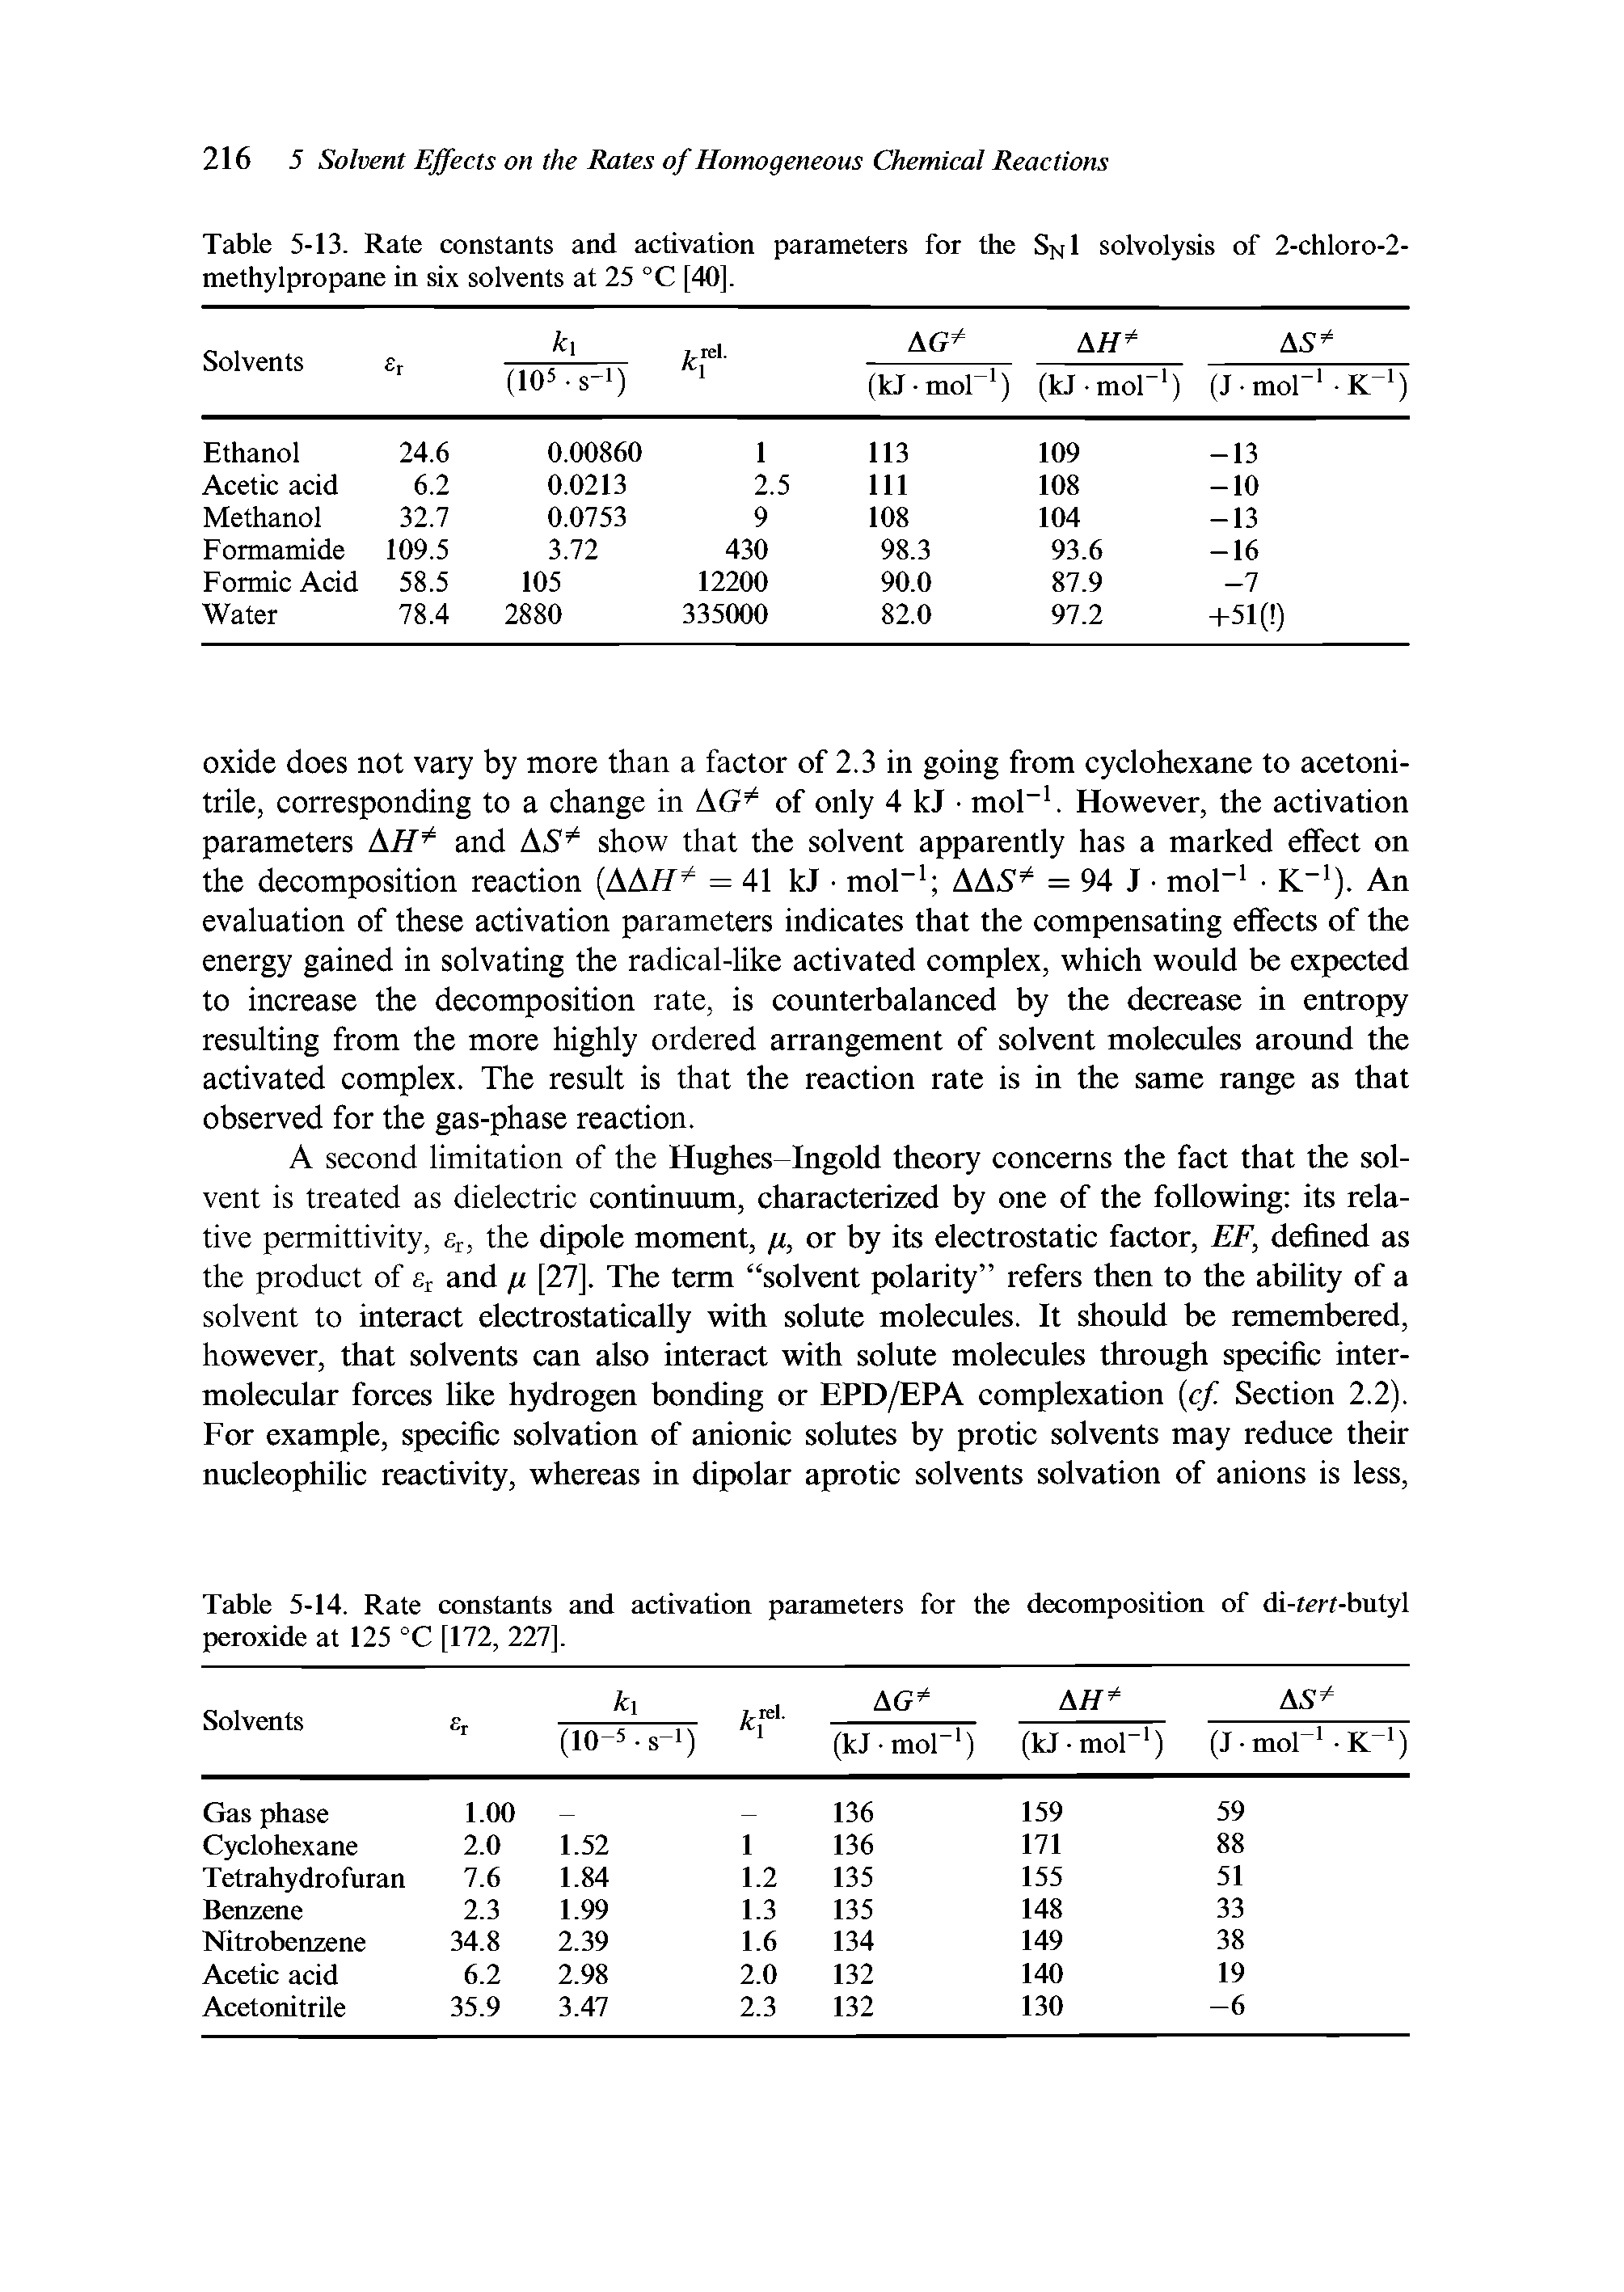 Table 5-14. Rate constants and activation parameters for the decomposition of di-tcrt-butyl peroxide at 125 °C [172, 227].